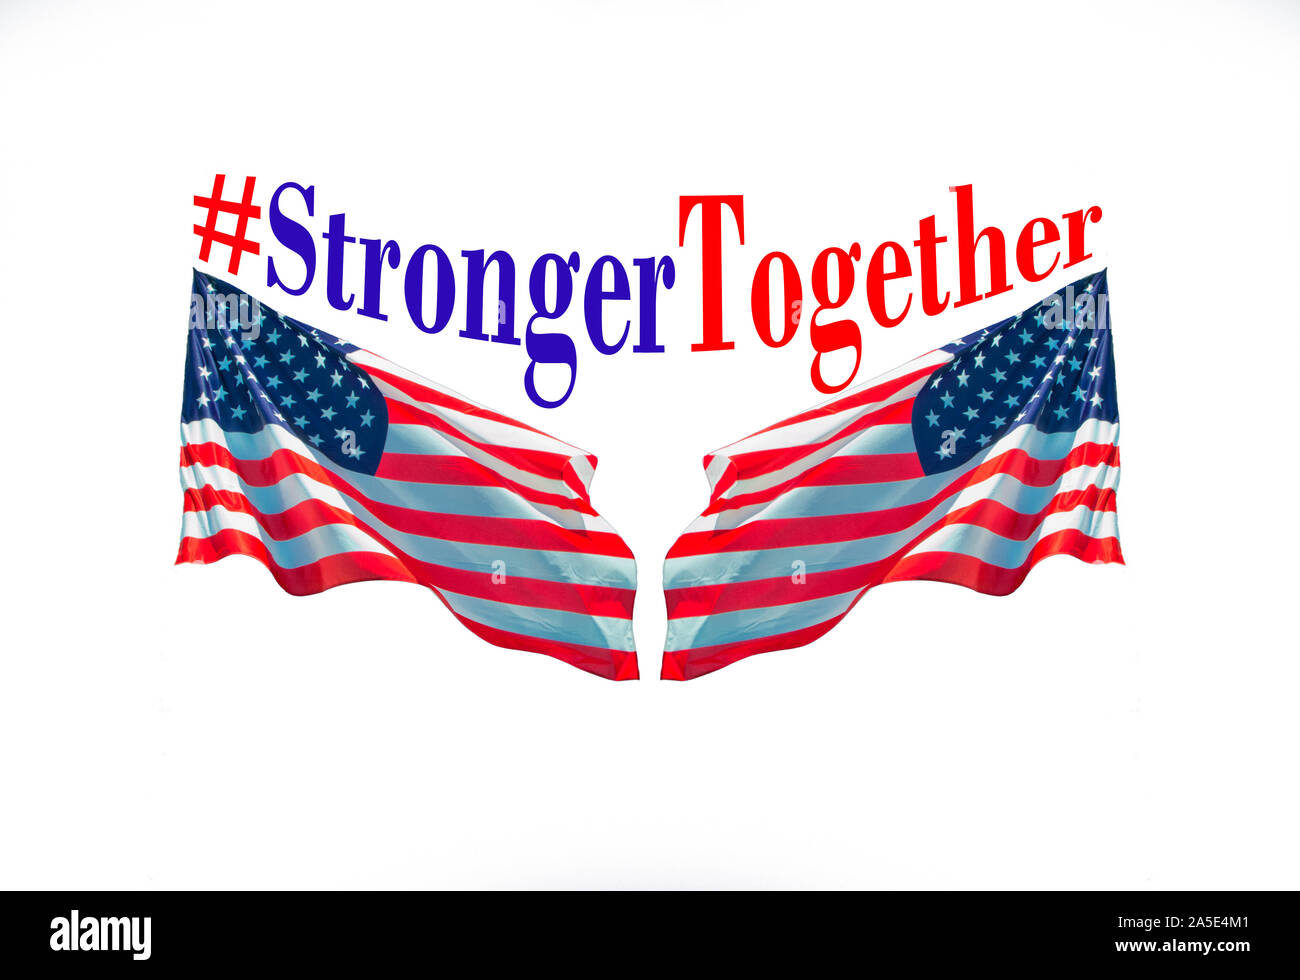 Stronger together hastag with american flags for political and electoral concepts - USA elections Presidential, Senate, House of Representatives Stock Photo